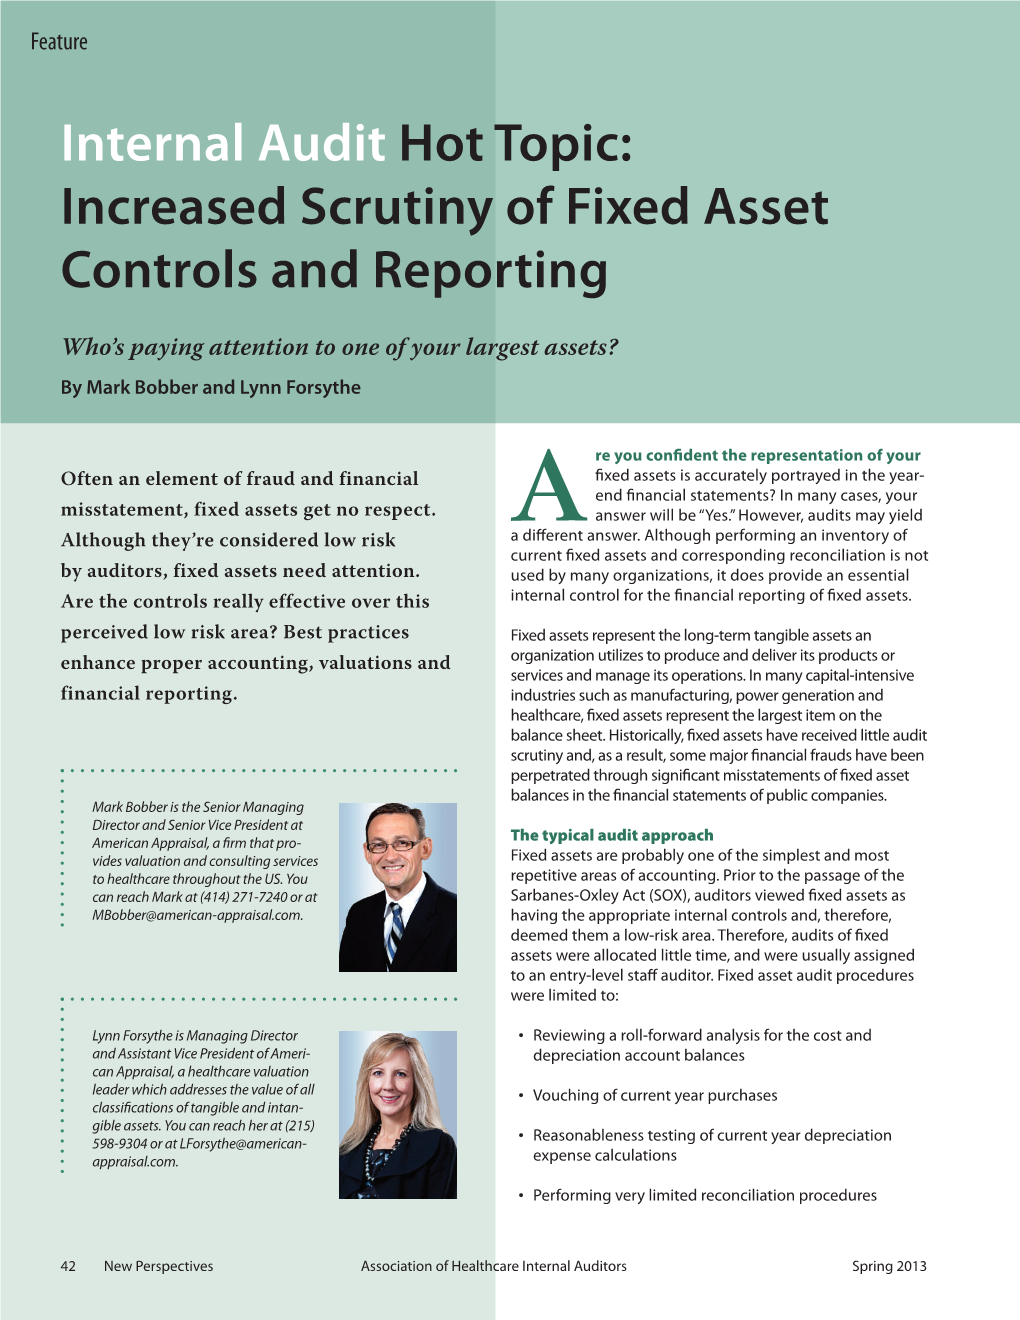 Internal Audit Hot Topic: Increased Scrutiny of Fixed Asset Controls and Reporting